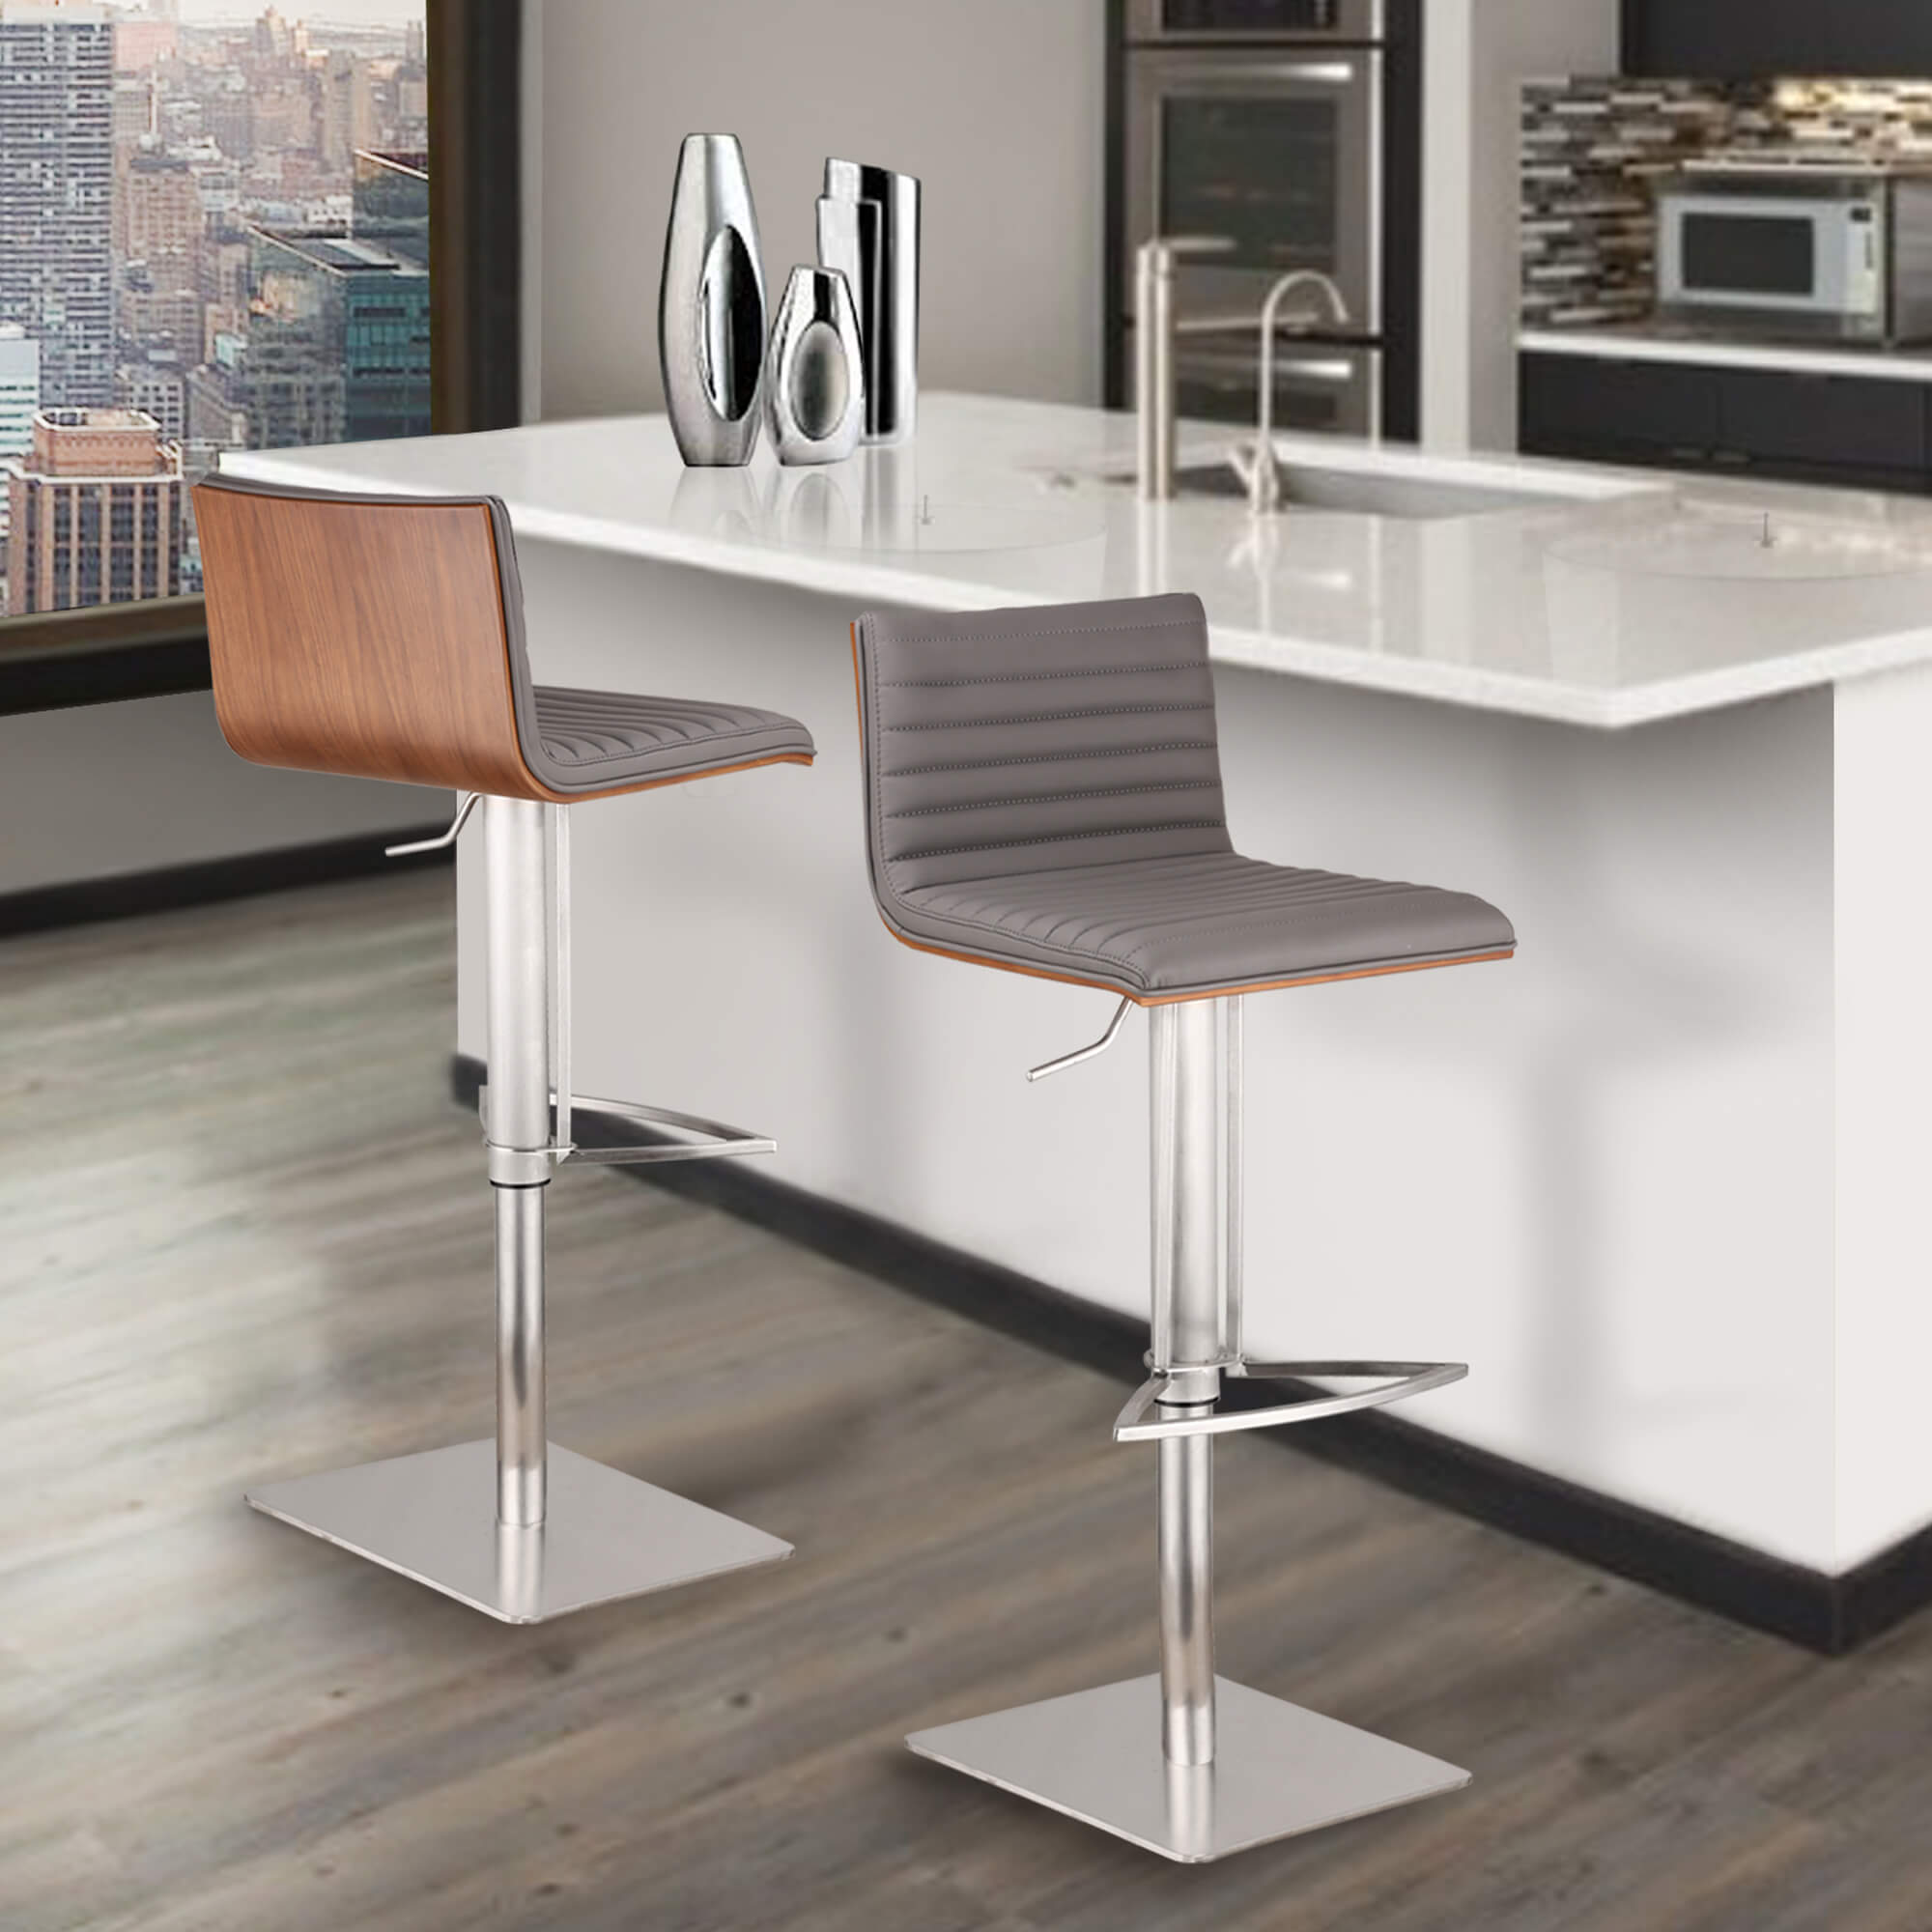 Cafe contemporary adjustable barstool